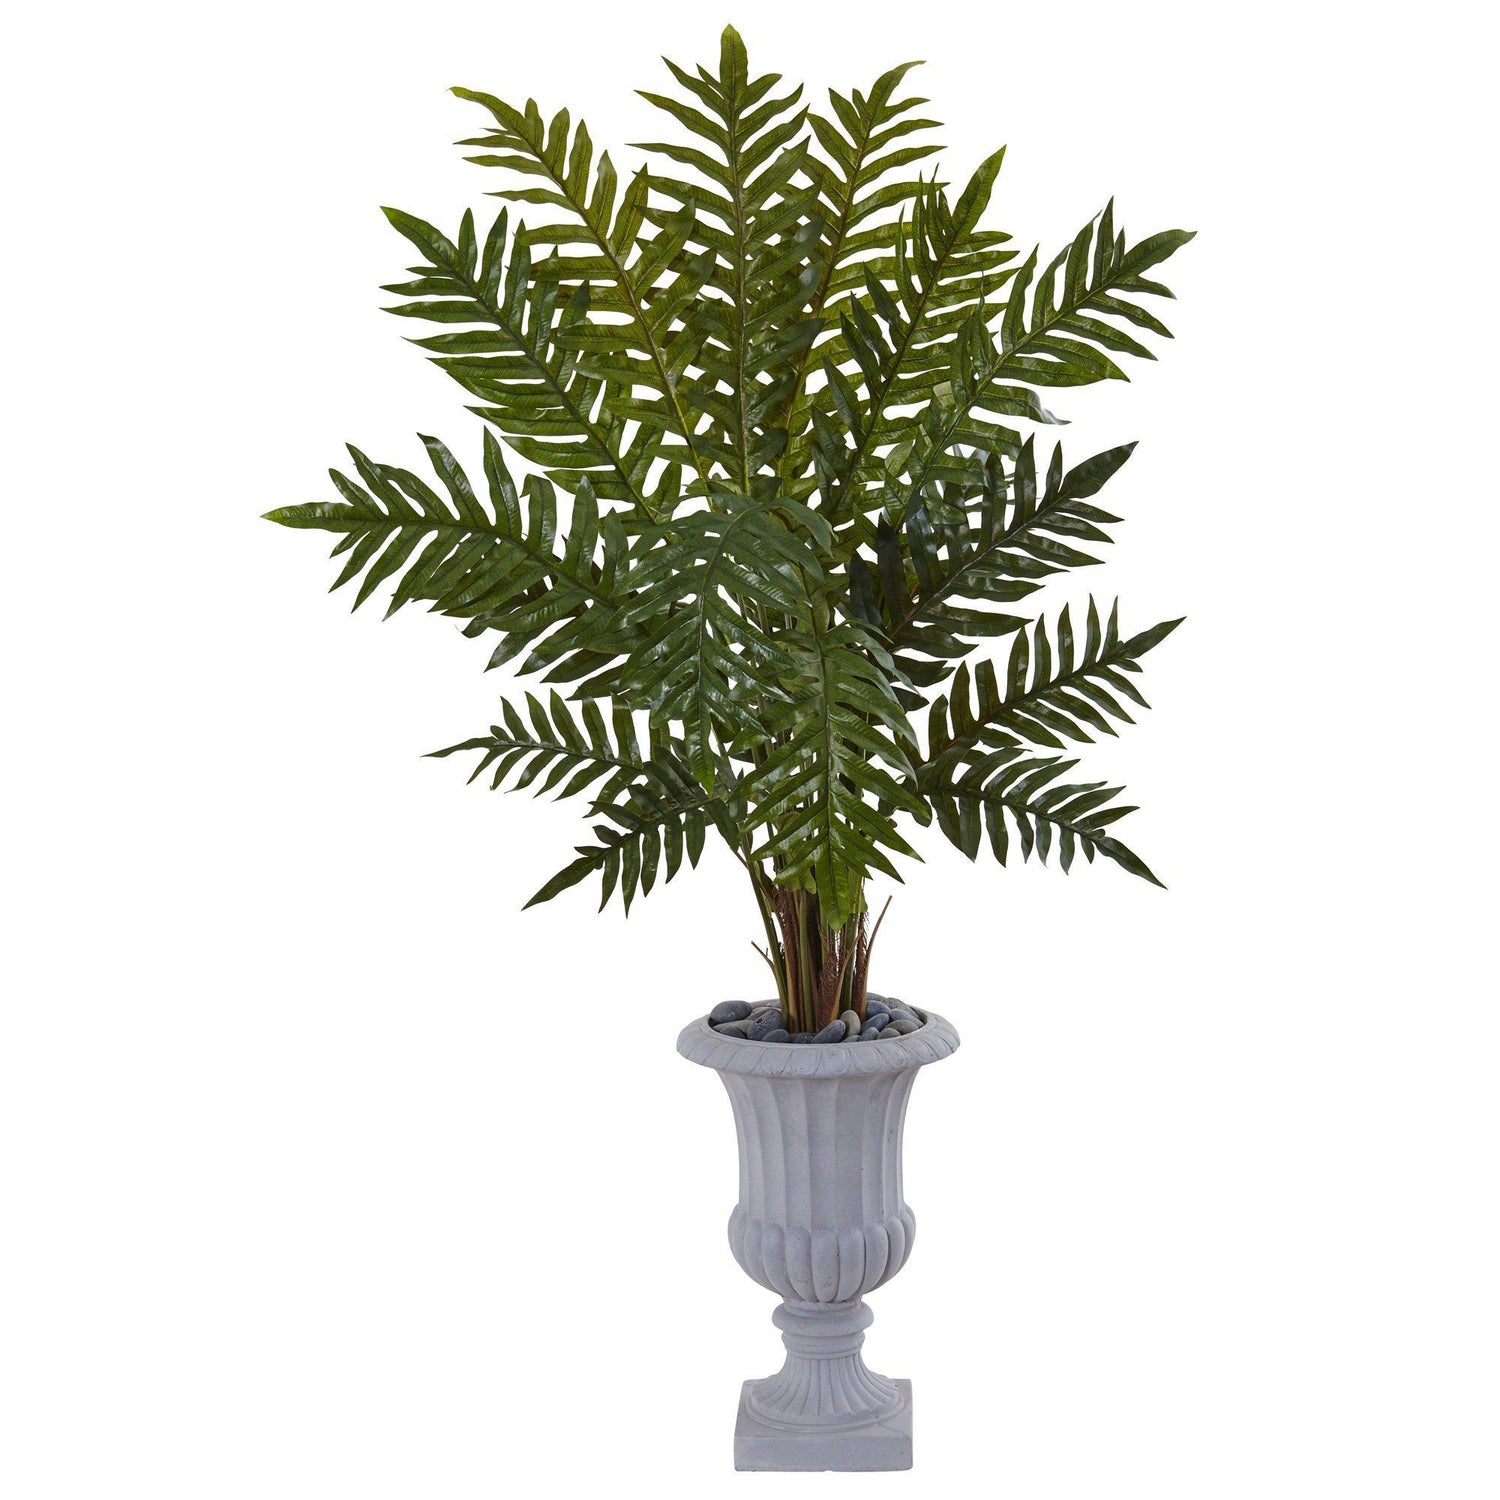 4.5’ Evergreen Plant in Gray Urn